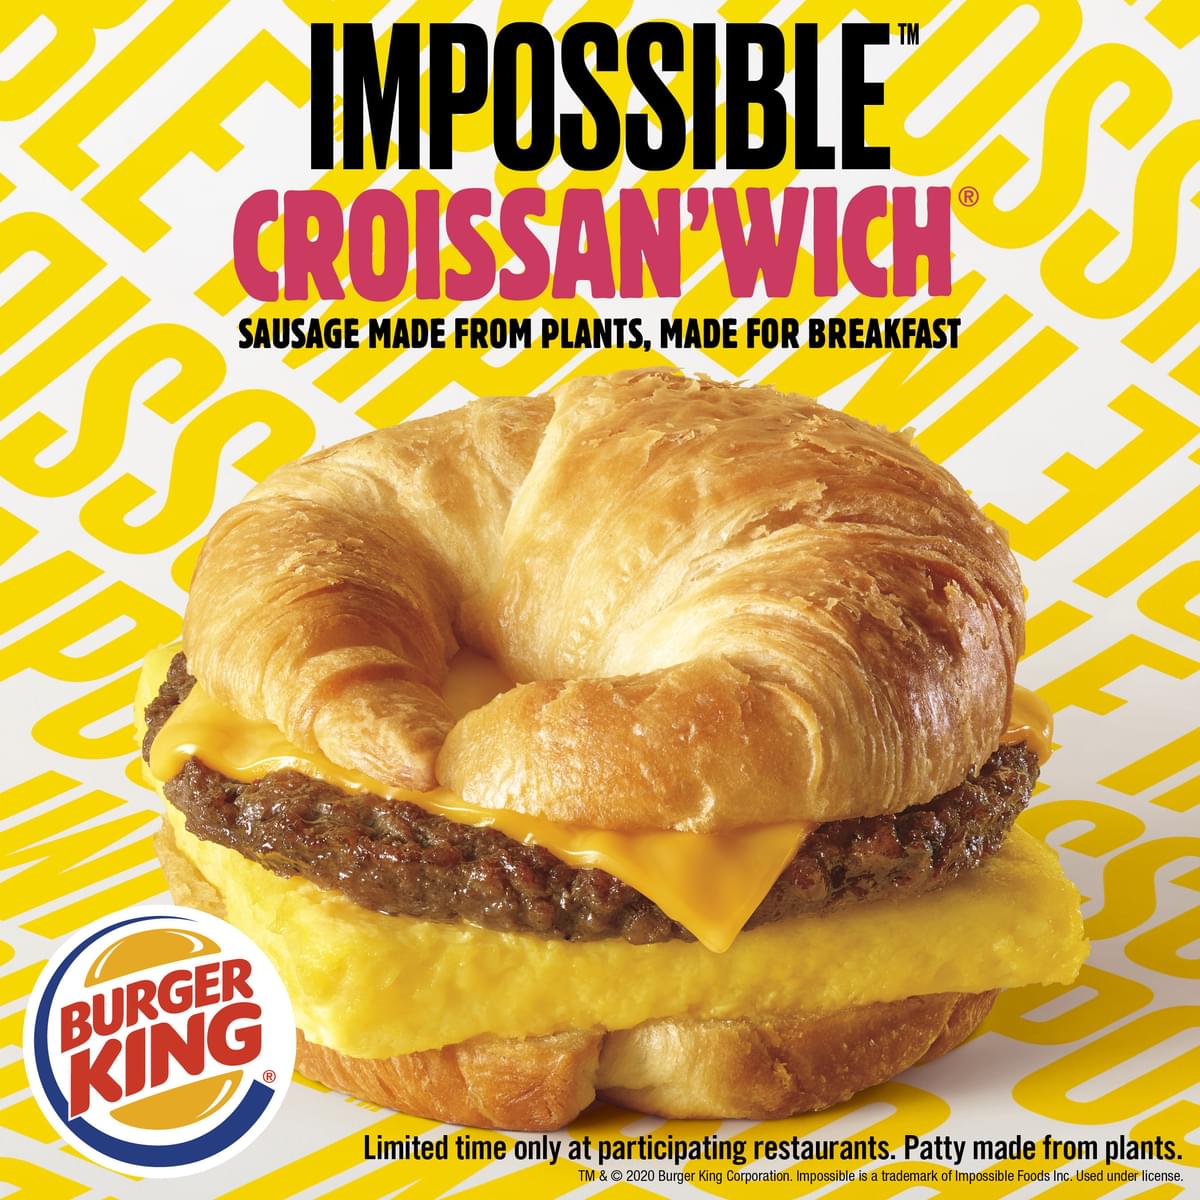 Is the BK Impossible Sausage Croissan’wich Healthier Than a Regular Croissan'wich?